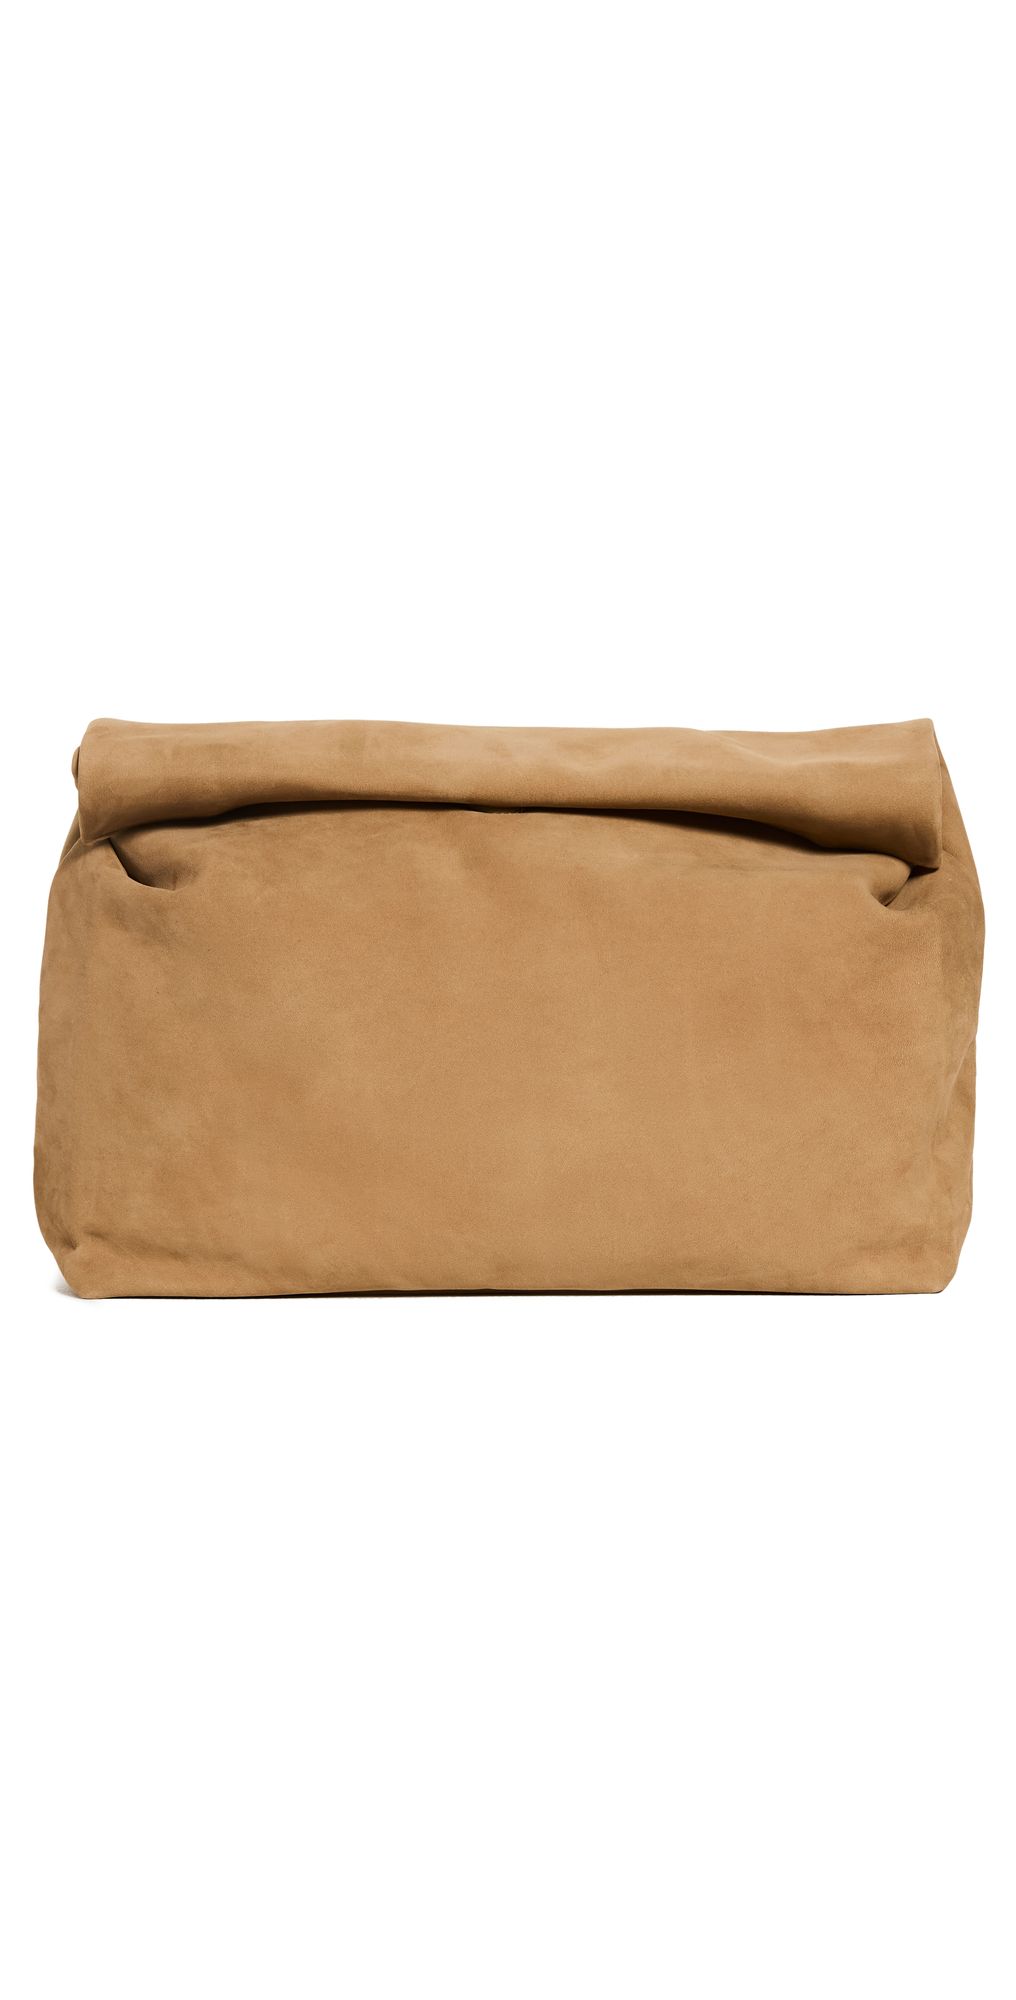 The Lunch Clutch | Shopbop